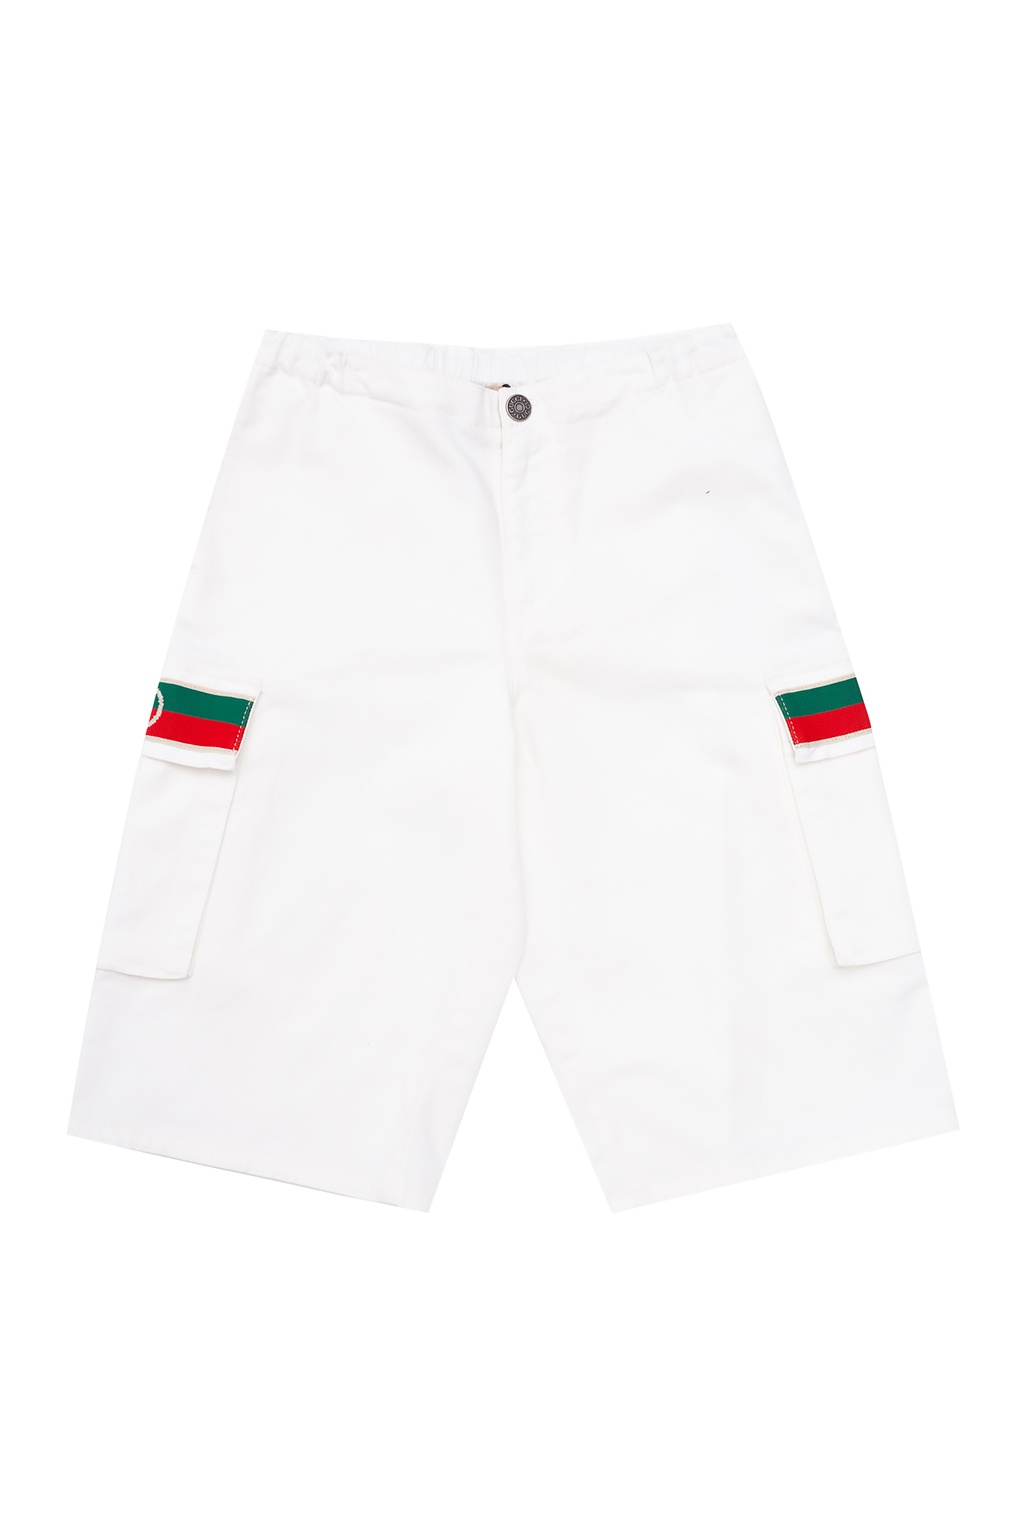 Gucci Kids Logo shorts, Kids's Boys clothes (4-14 years)